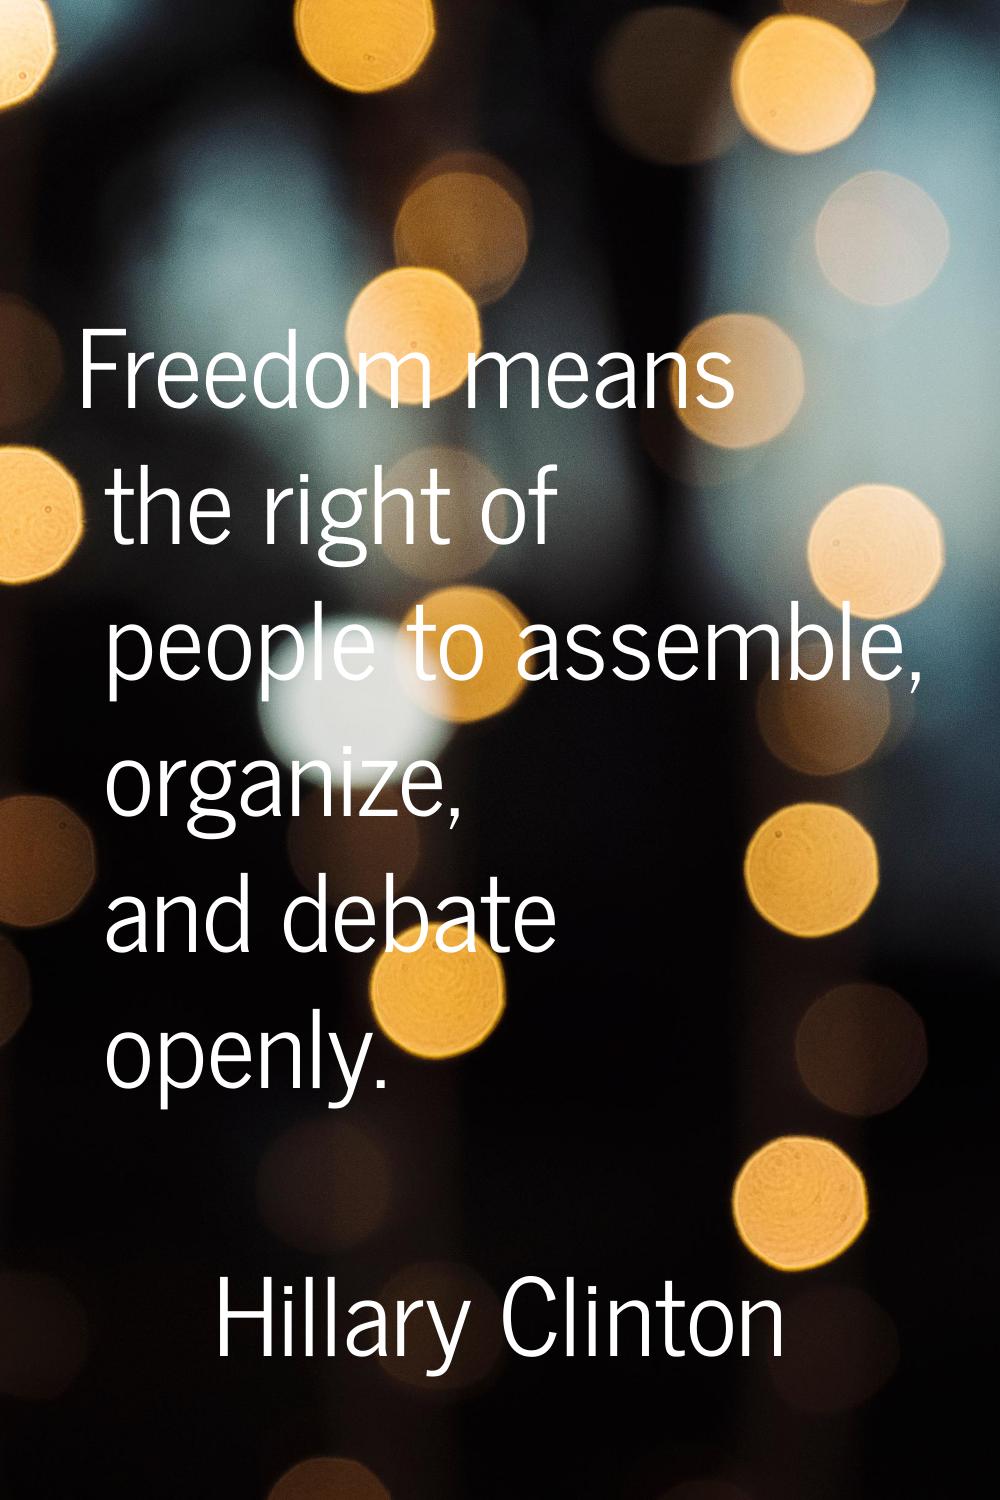 Freedom means the right of people to assemble, organize, and debate openly.